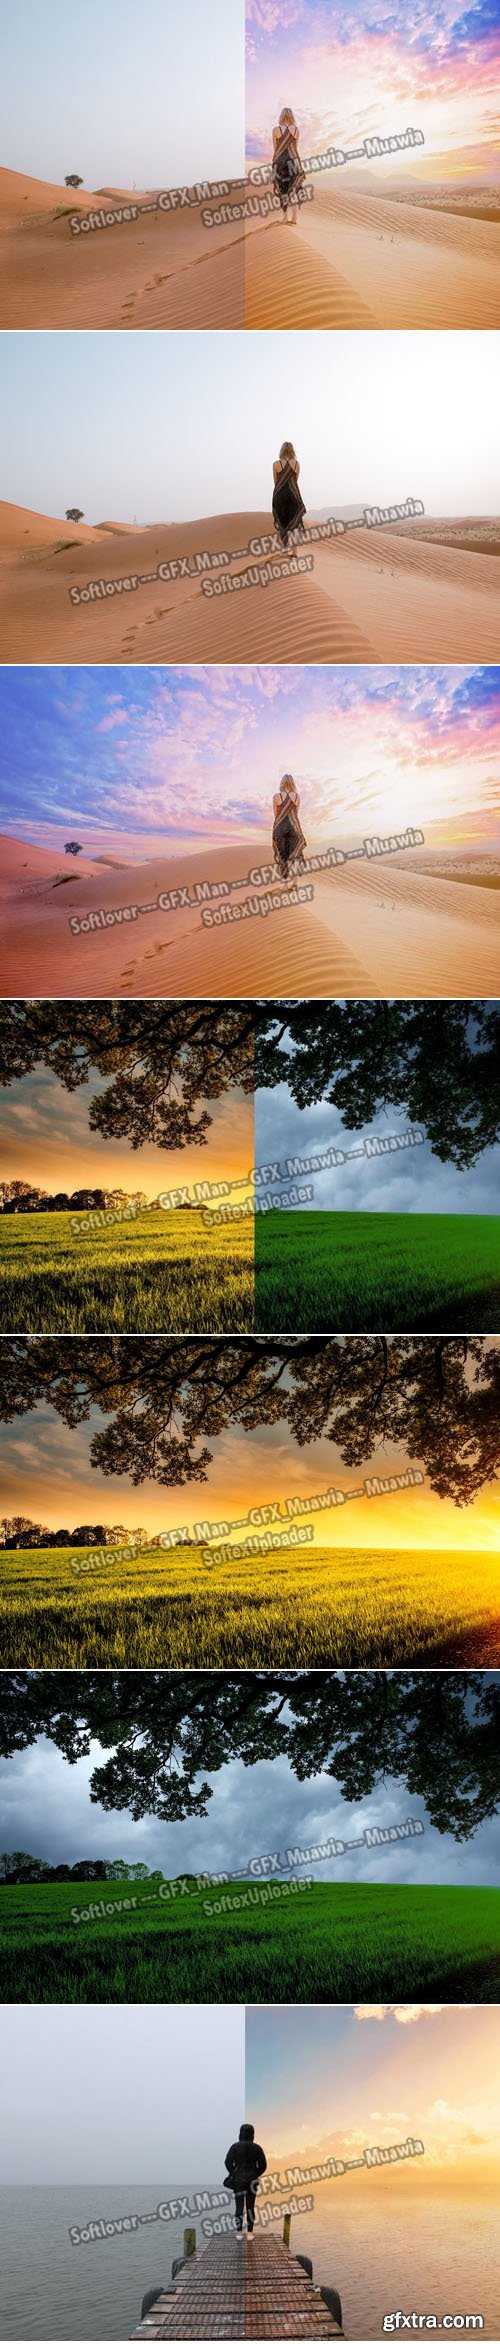 5 Sky Replacement Photoshop Effects Collection +Tutorial